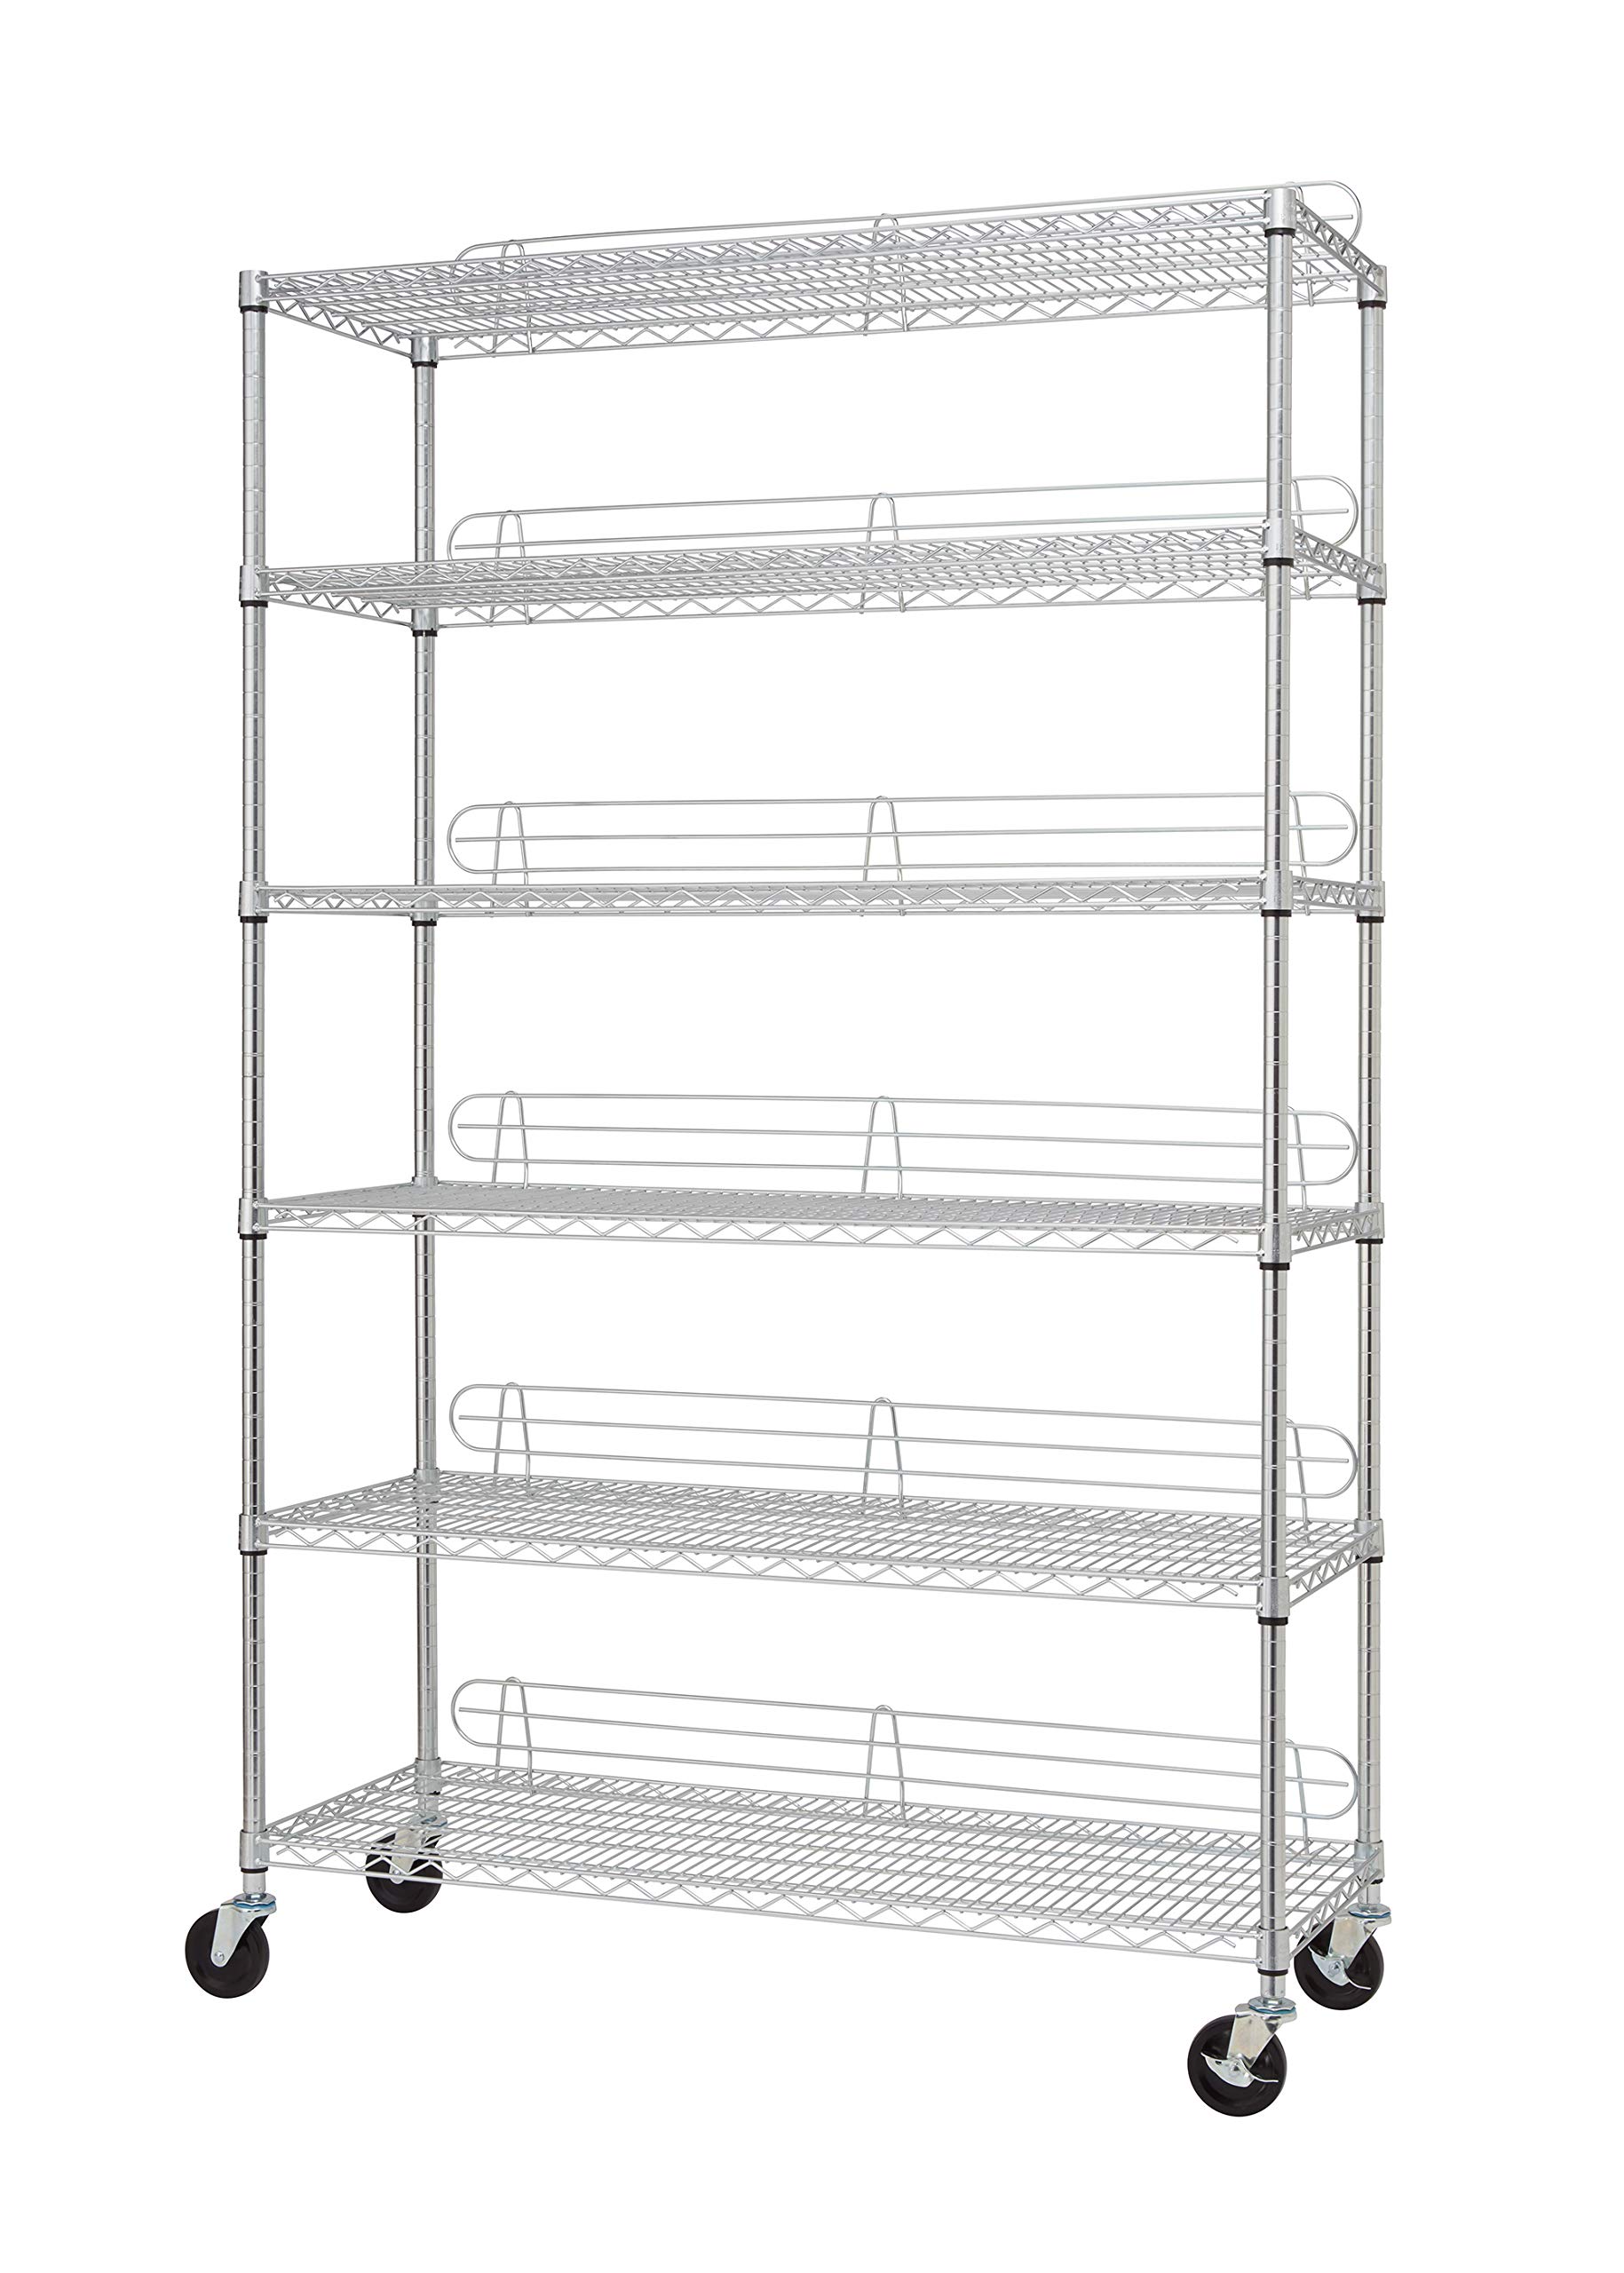 TRINITY EcoStorage Heavy Duty 6-Tier Adjustable Wire Shelving with Wheels and Backstands for Kitchen Organization, Garage Shelving, NSF Certified, 48” W x 18” D x 72-77” H, 800-4800 lb Capacity Chrome